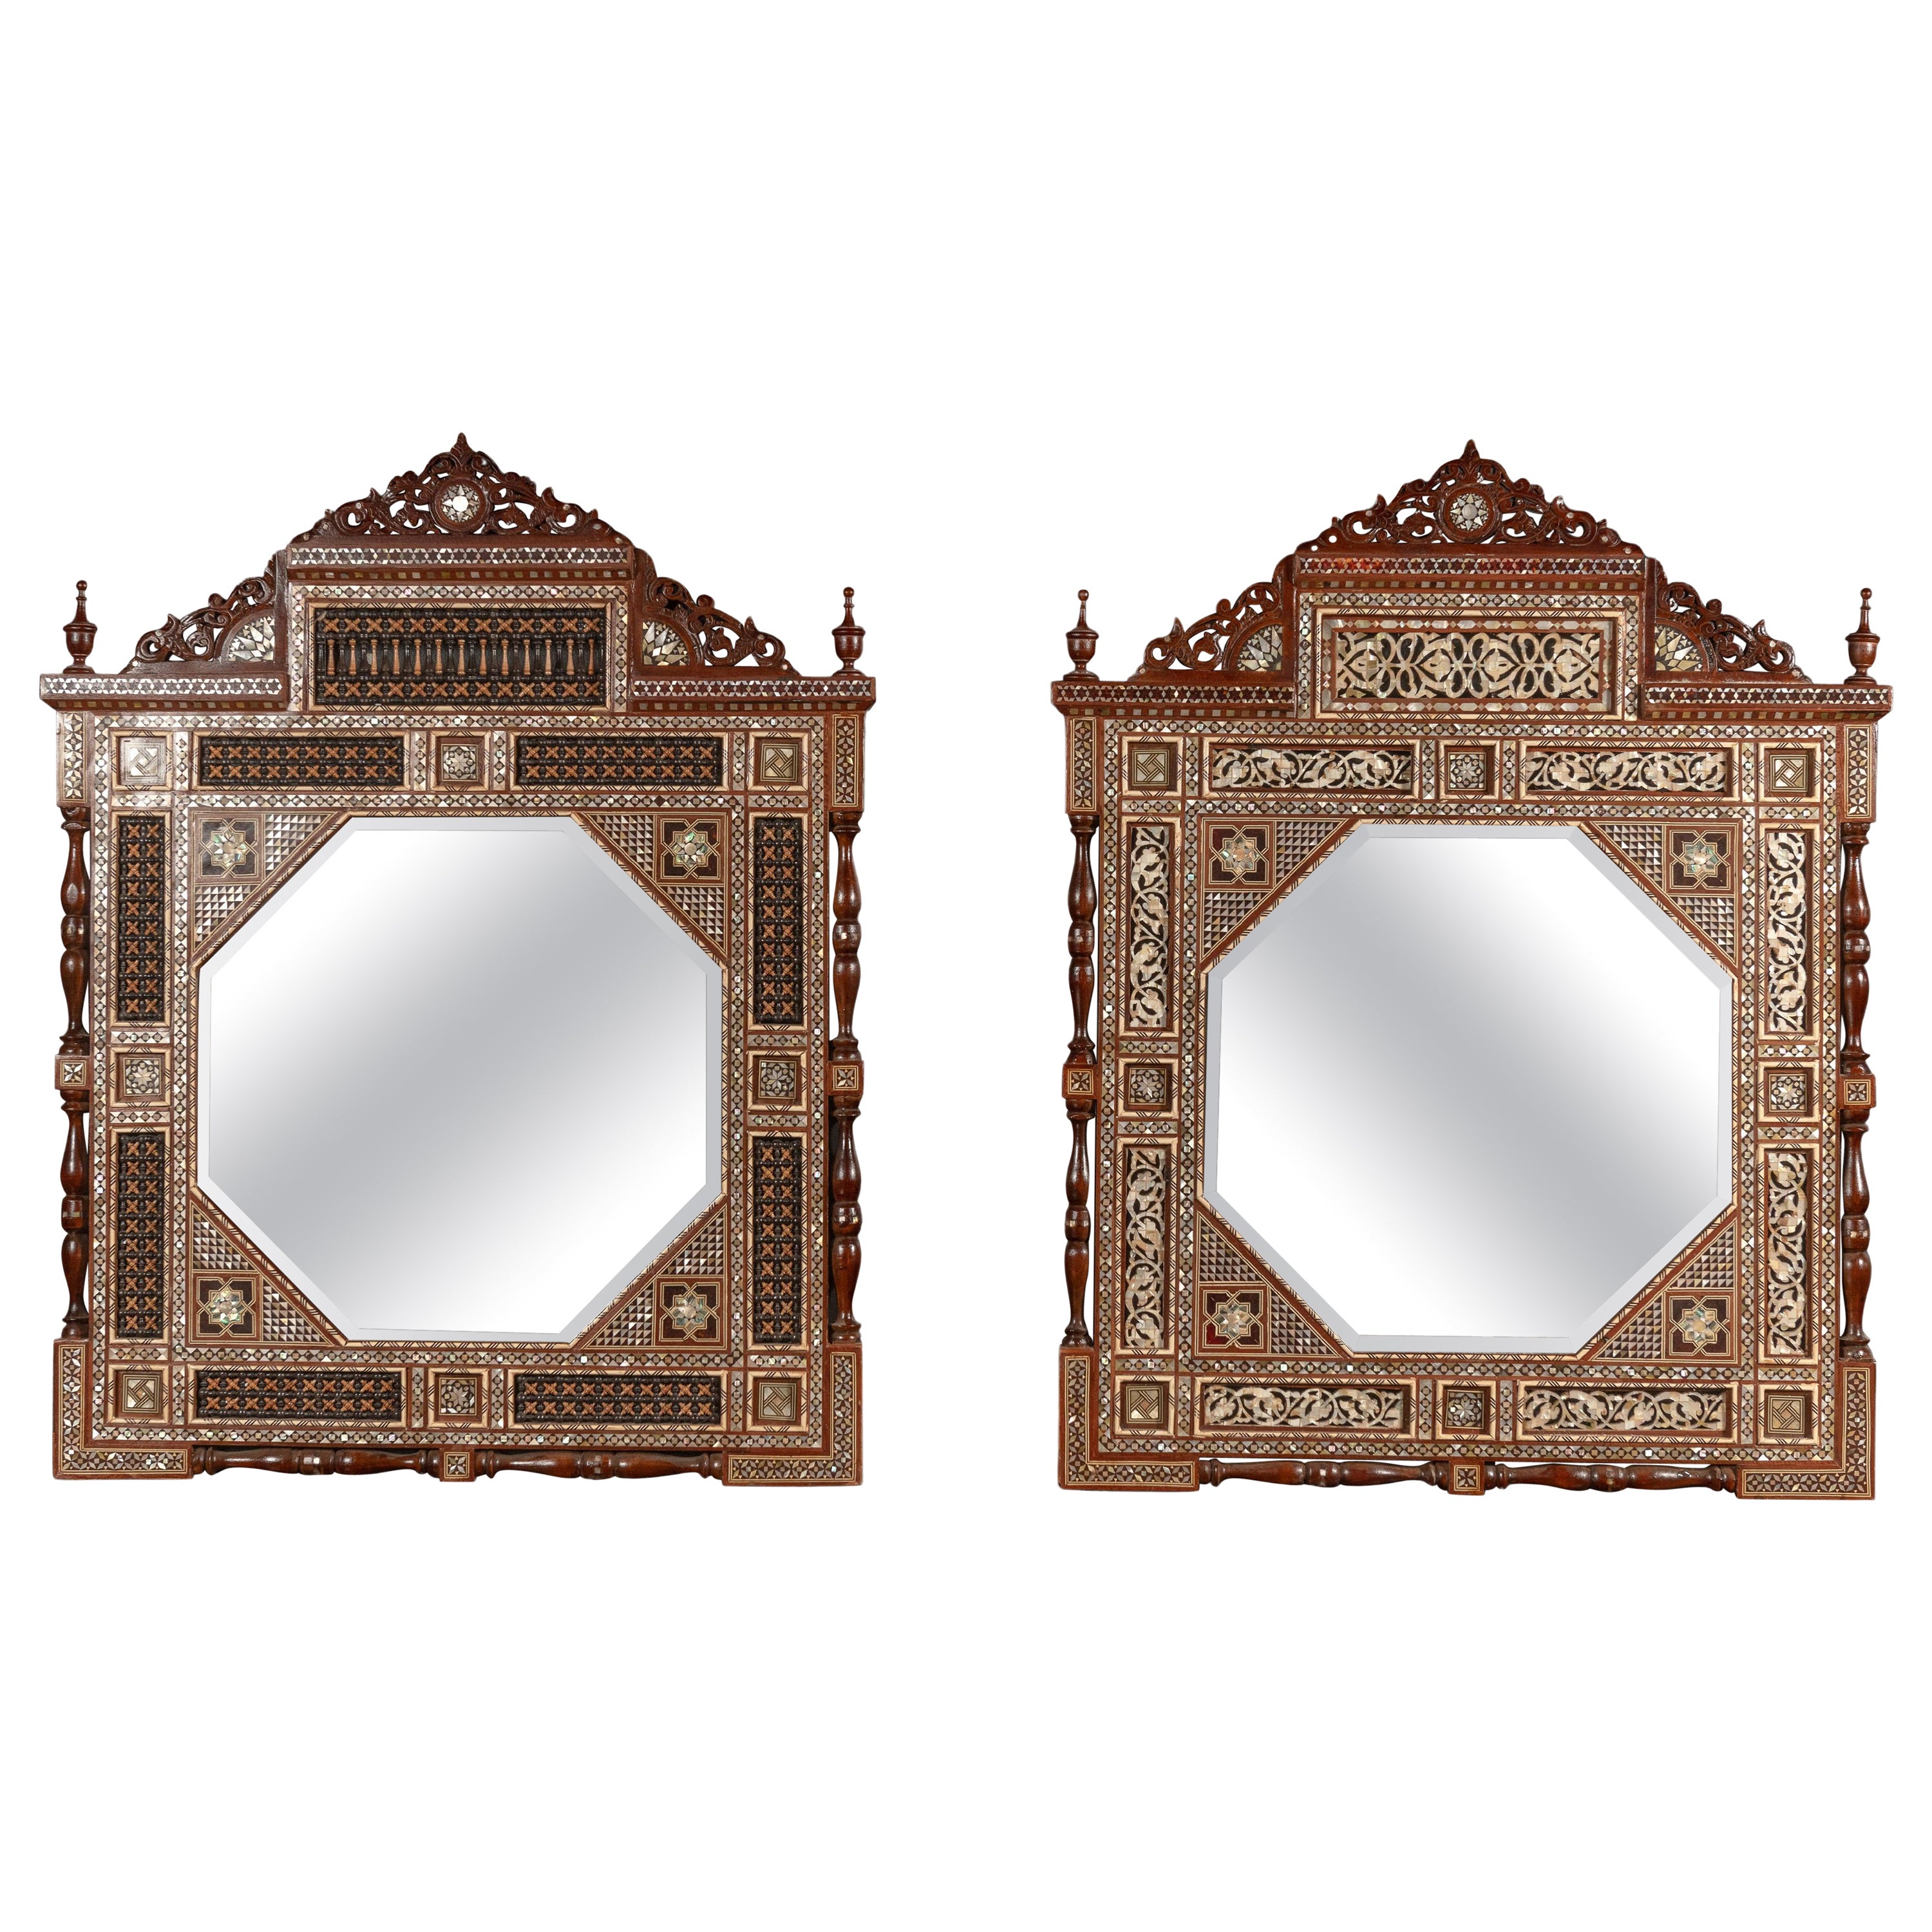 Two Unique Syrian Mirrors with Mother of Pearl Inlay and Wooden Marquetry  For Sale